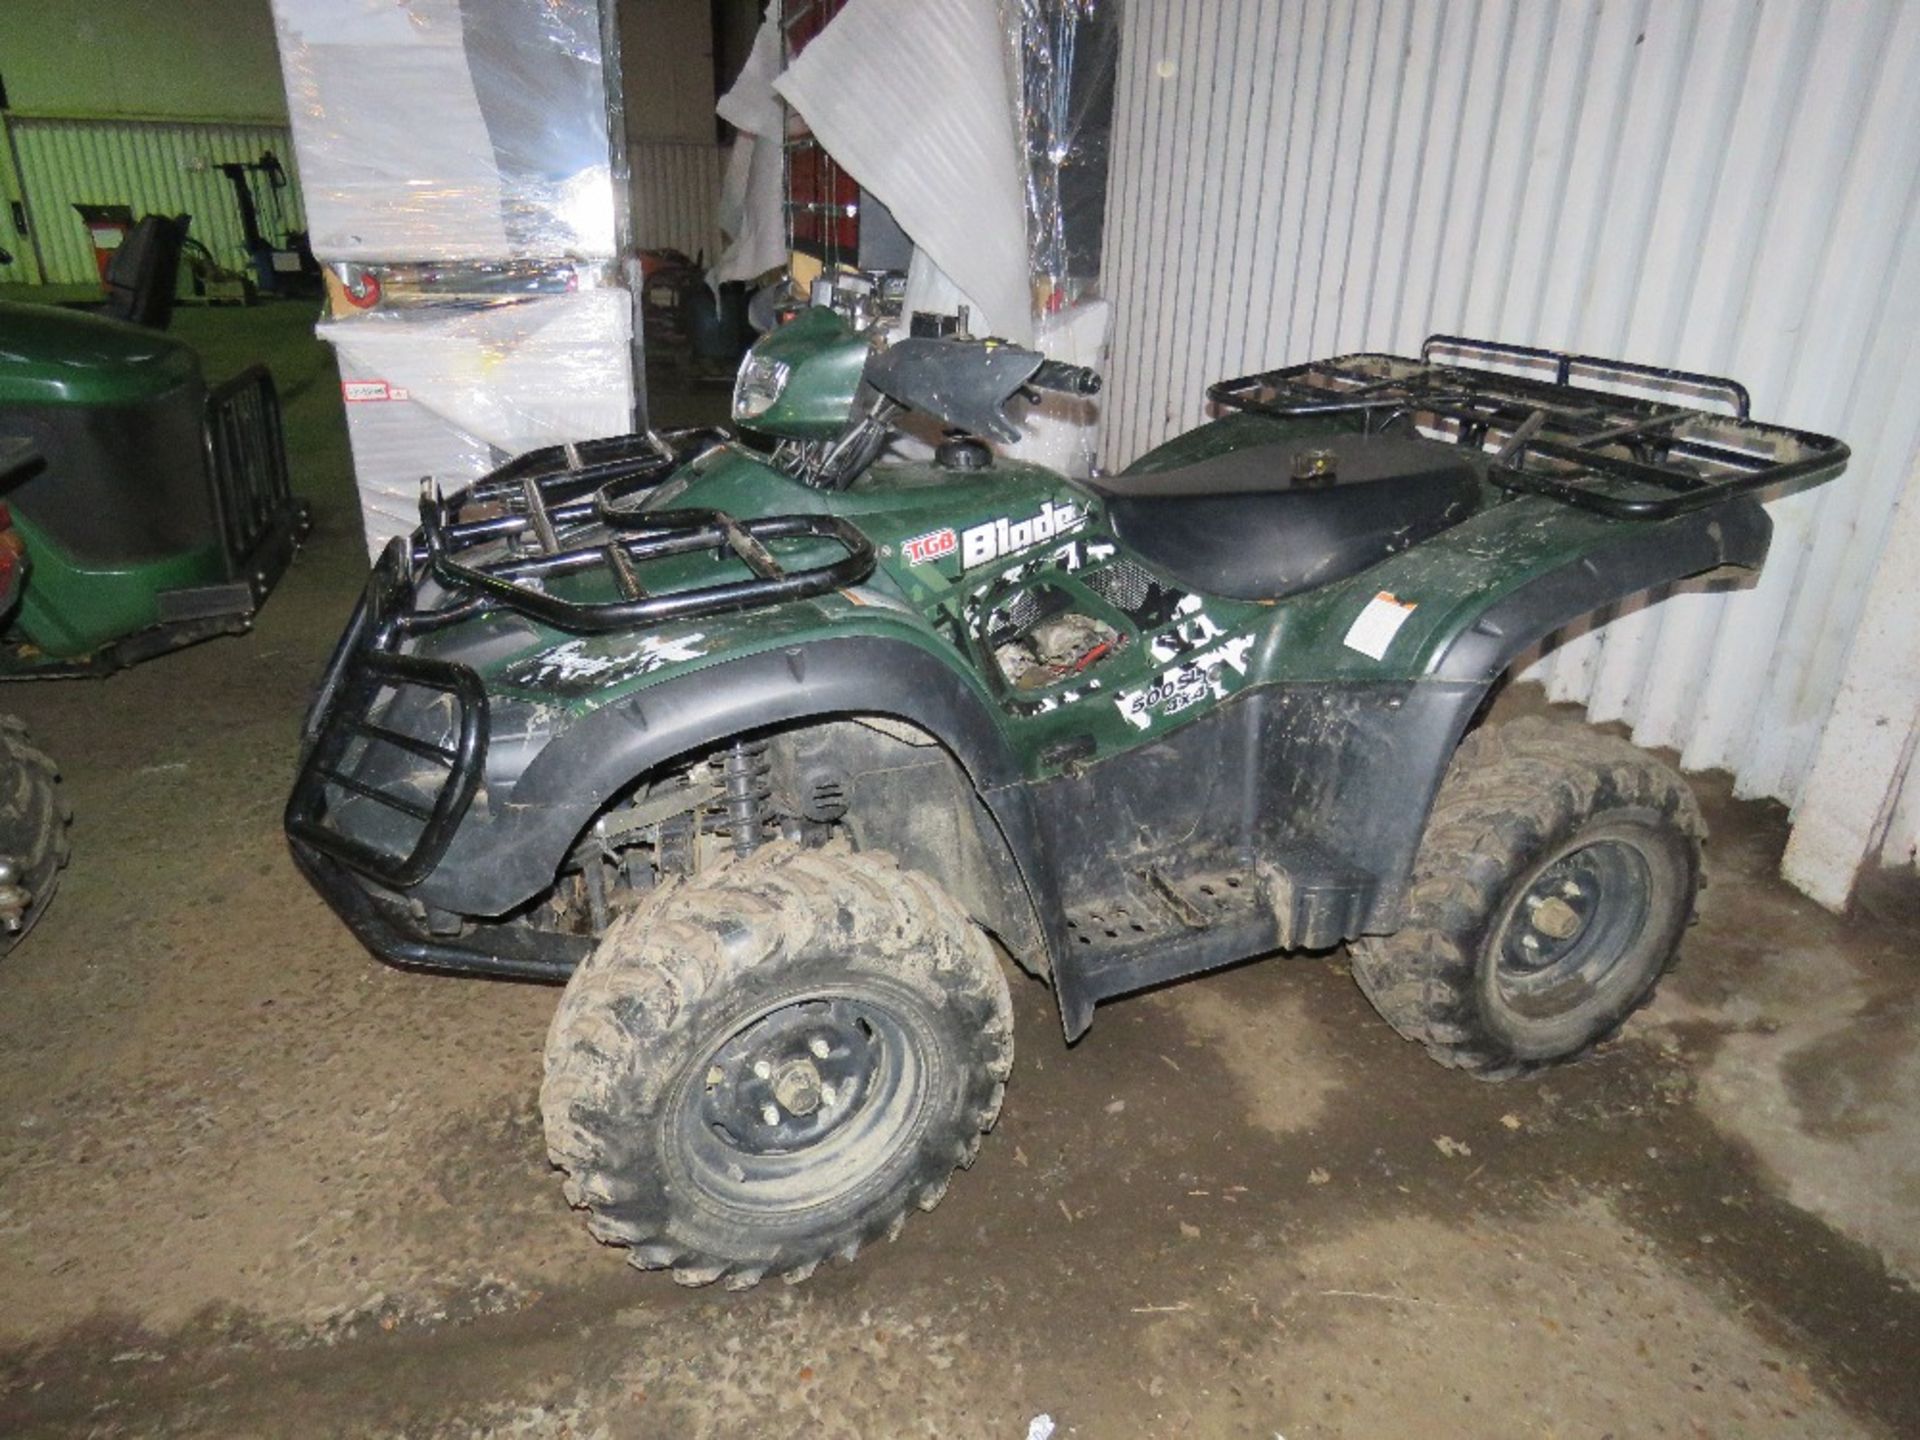 TGB/QUADZILLA BLADE 500SL SELECTABLE 4WD QUAD BIKE, YEAR 2015 APPROX, 970 REC MILES APPROX. WHEN TES - Image 2 of 7